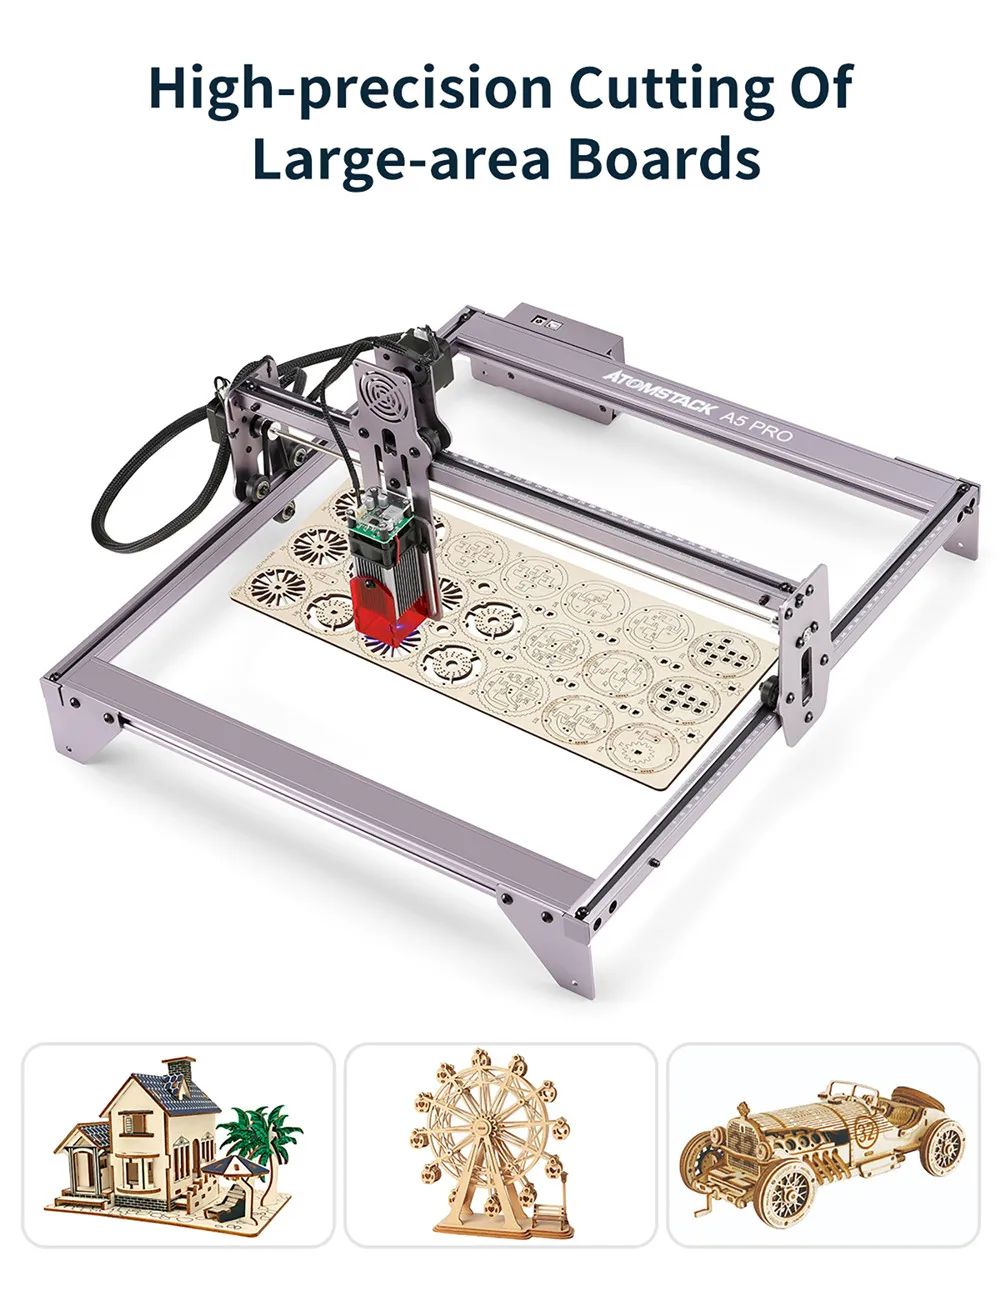 Atomstack A5 Pro 410*400mm Large Working Area 40w High Power Laser Engraver Lazer Engraving Cutting Machine - Buy Laser Engraving Machine,Cnc Router Kit Control Laser Engraver Wood Plastic Acrylic Pcb